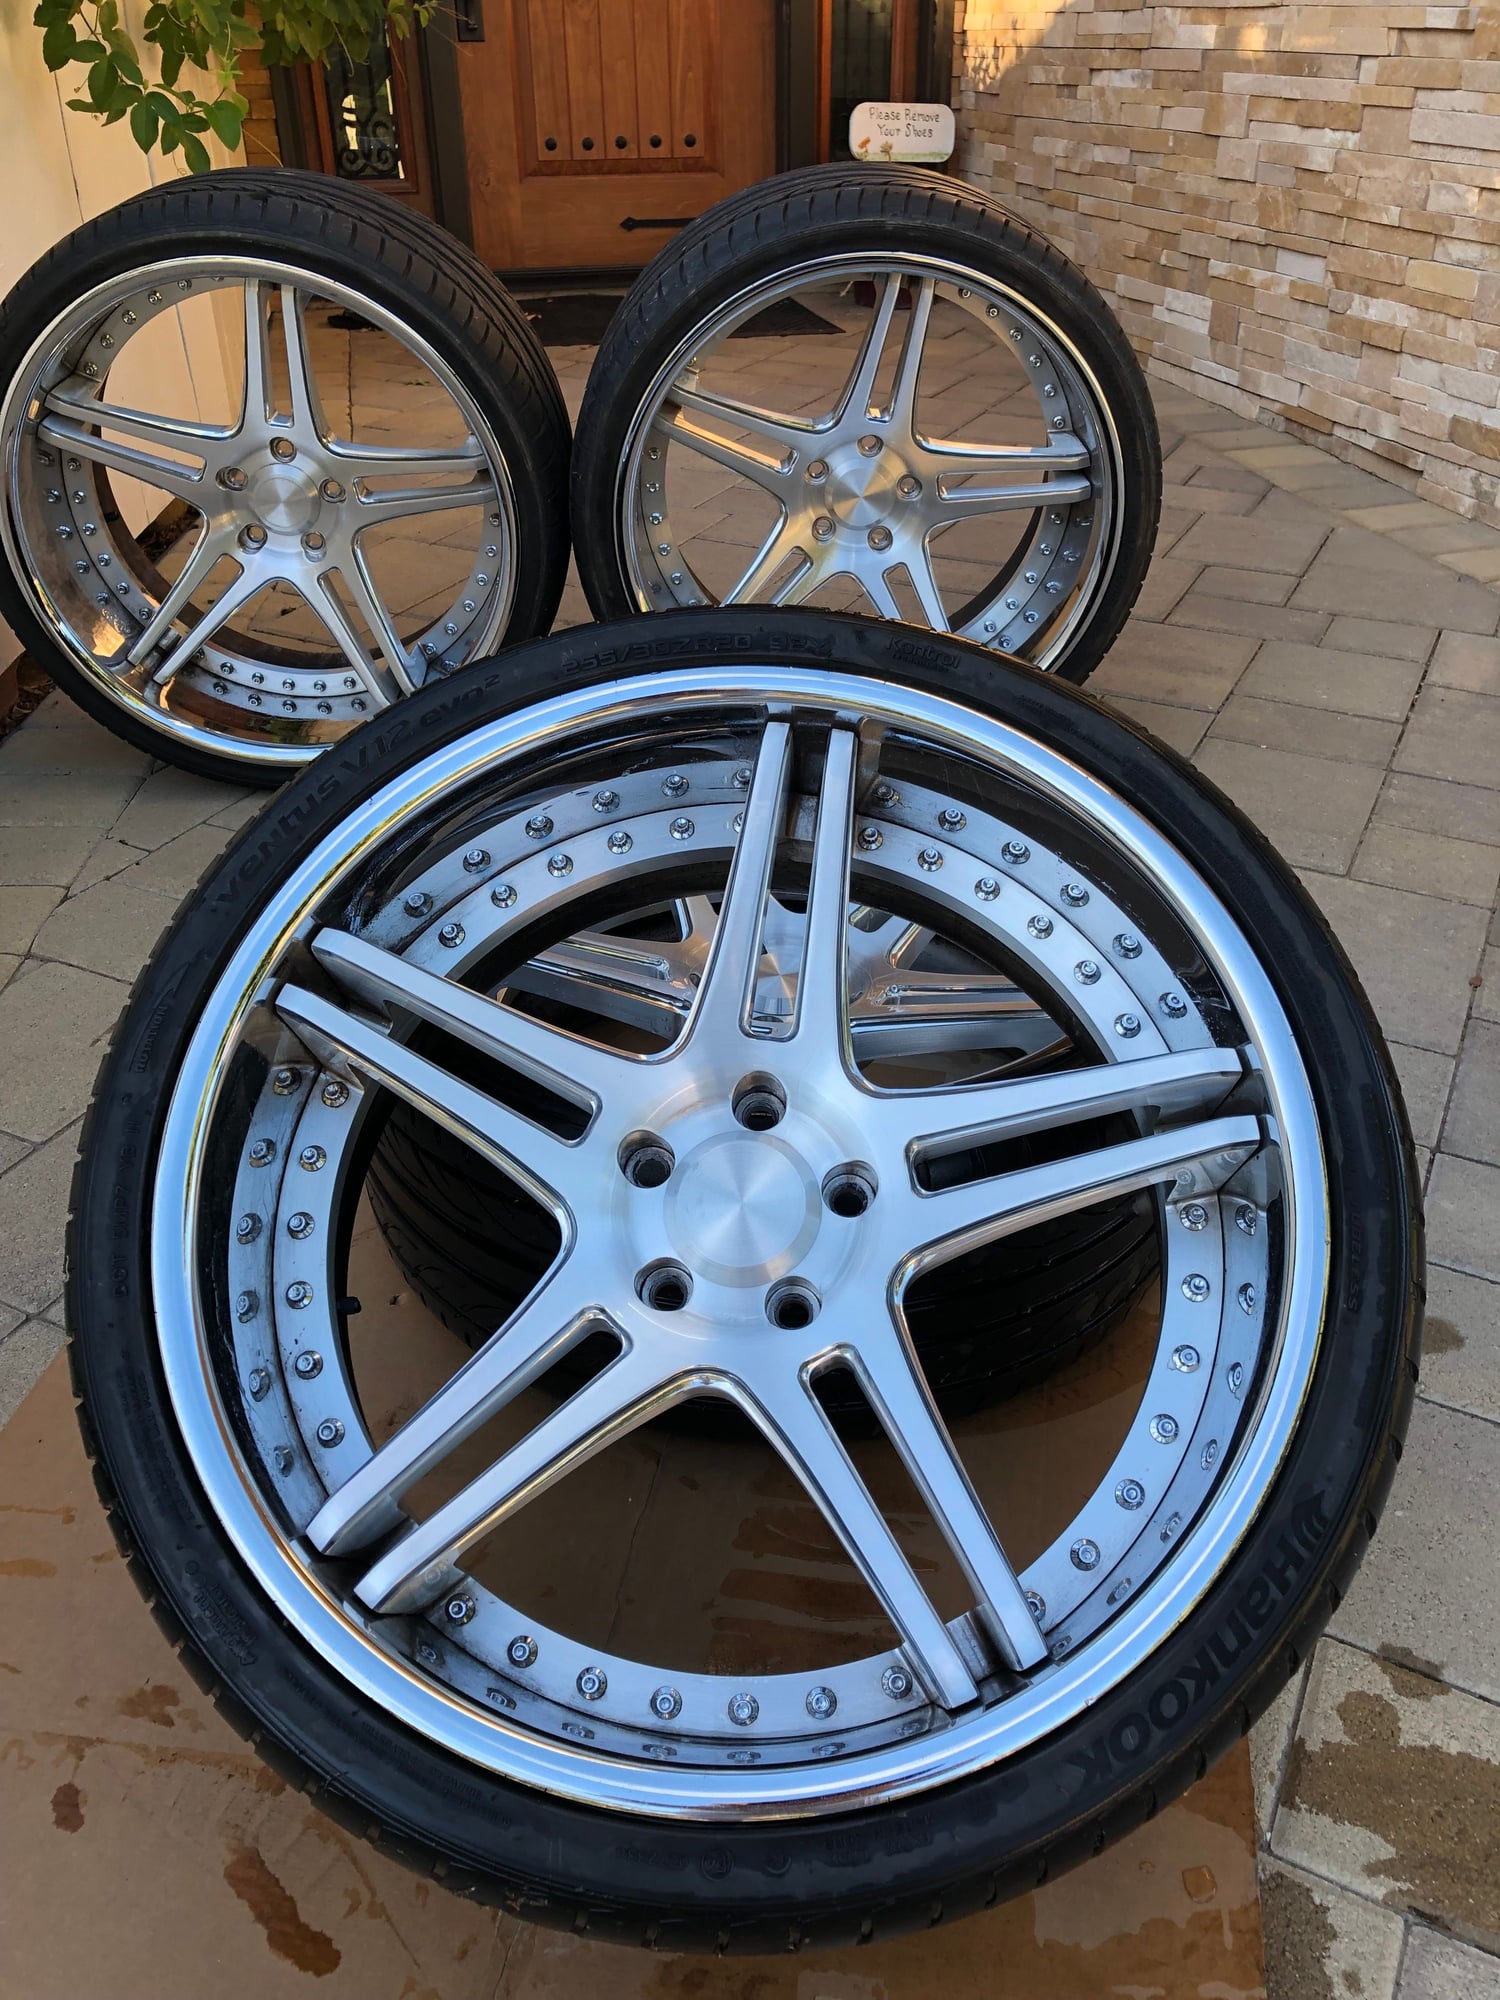 20" 3-Piece Forged Wheels For Mercedes CLS - $2000 - MBWorld.org Forums